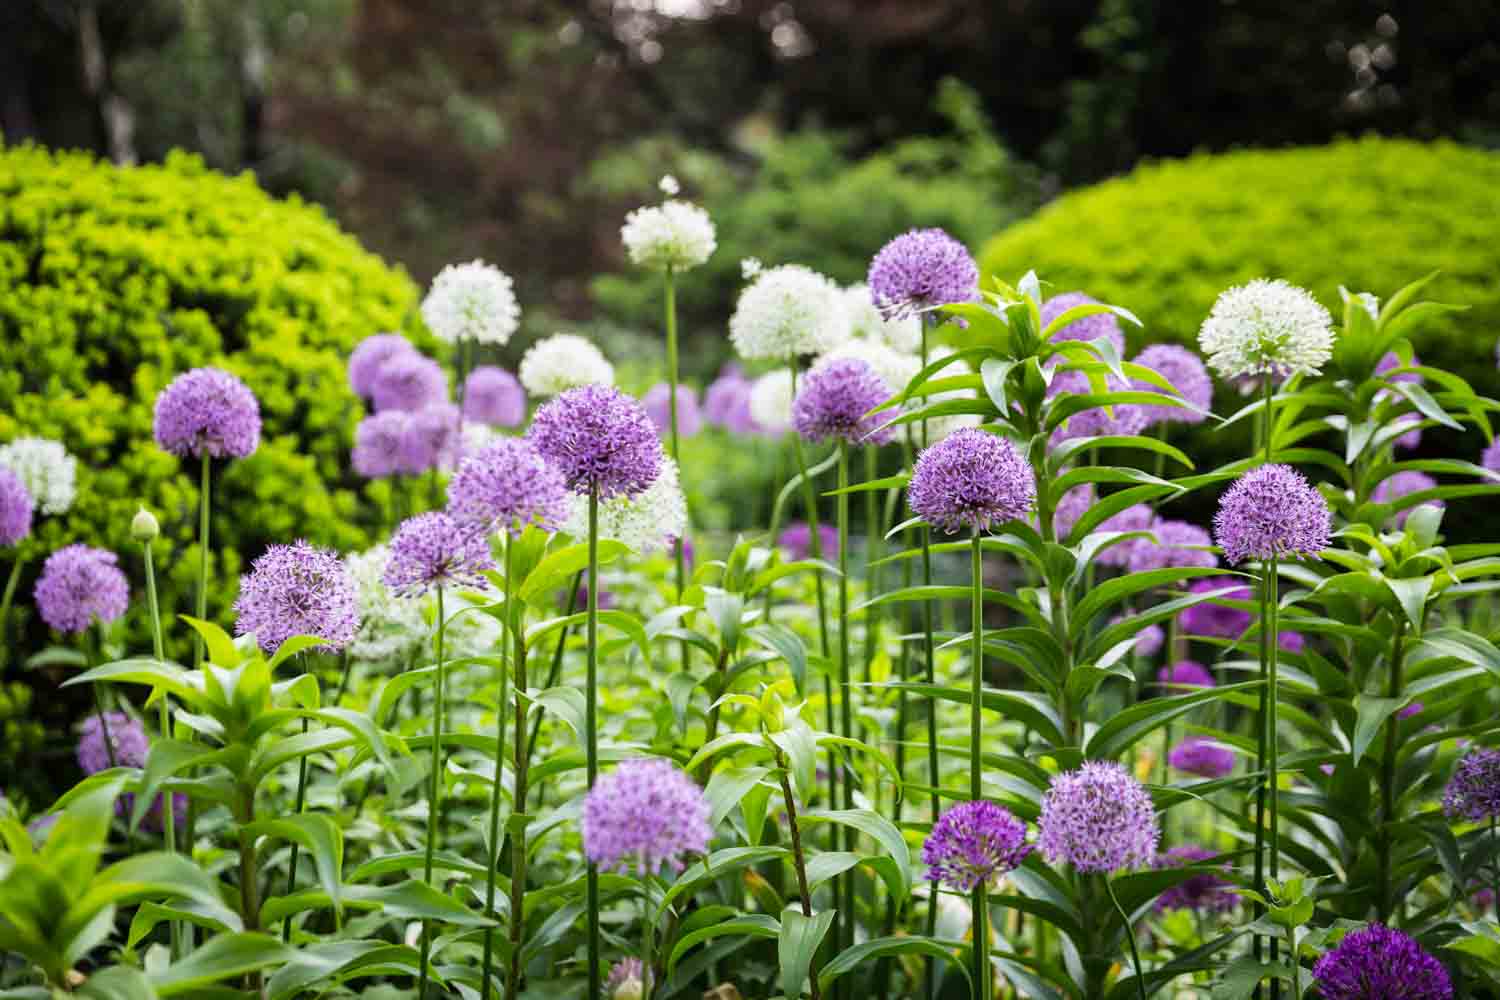 Purple and white flowers in Central Park Shakespeare Garden